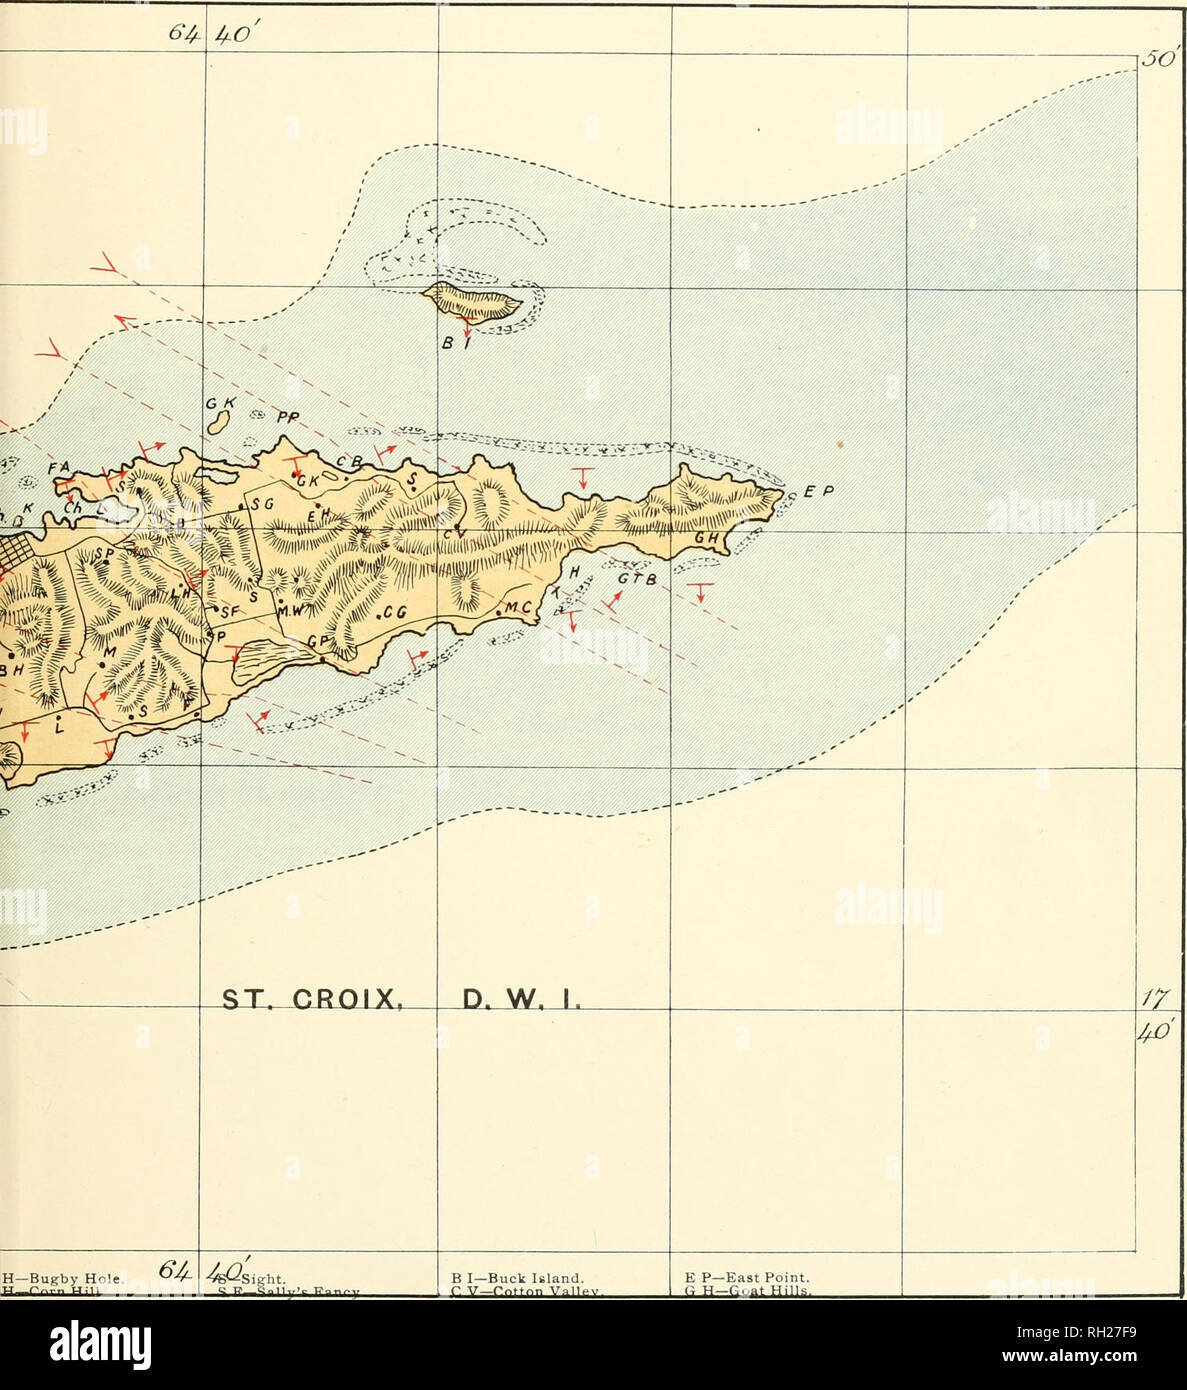 . The building of an island : being a sketch of the geological structure of the Danish West Indian island of St. Croix, or Santa Cruz. Geology -- Virgin Islands of the United States Saint Croix. A—Fort Augusta, h—Christiansted. h L—Christiansted Lagoon. —The Kay. —Shoys. —Bostzburg. H—Lowry Hill, P—St. Peter's. G K—Green Kay Islet and Estate, P P—Pull Point. S G—South Gate. E H—Easthill School. C B—Coakley Bay. S—Solitude.. —Munster. —Springs. —Fareham. —Longford. M W—Mt Washington Estate. P—Petronella. G P—Great Pond. C G—Cotton Grove. M C—Madam Carty. T H—Turner's Hole. G T B—Grape Tree Bay. Stock Photo